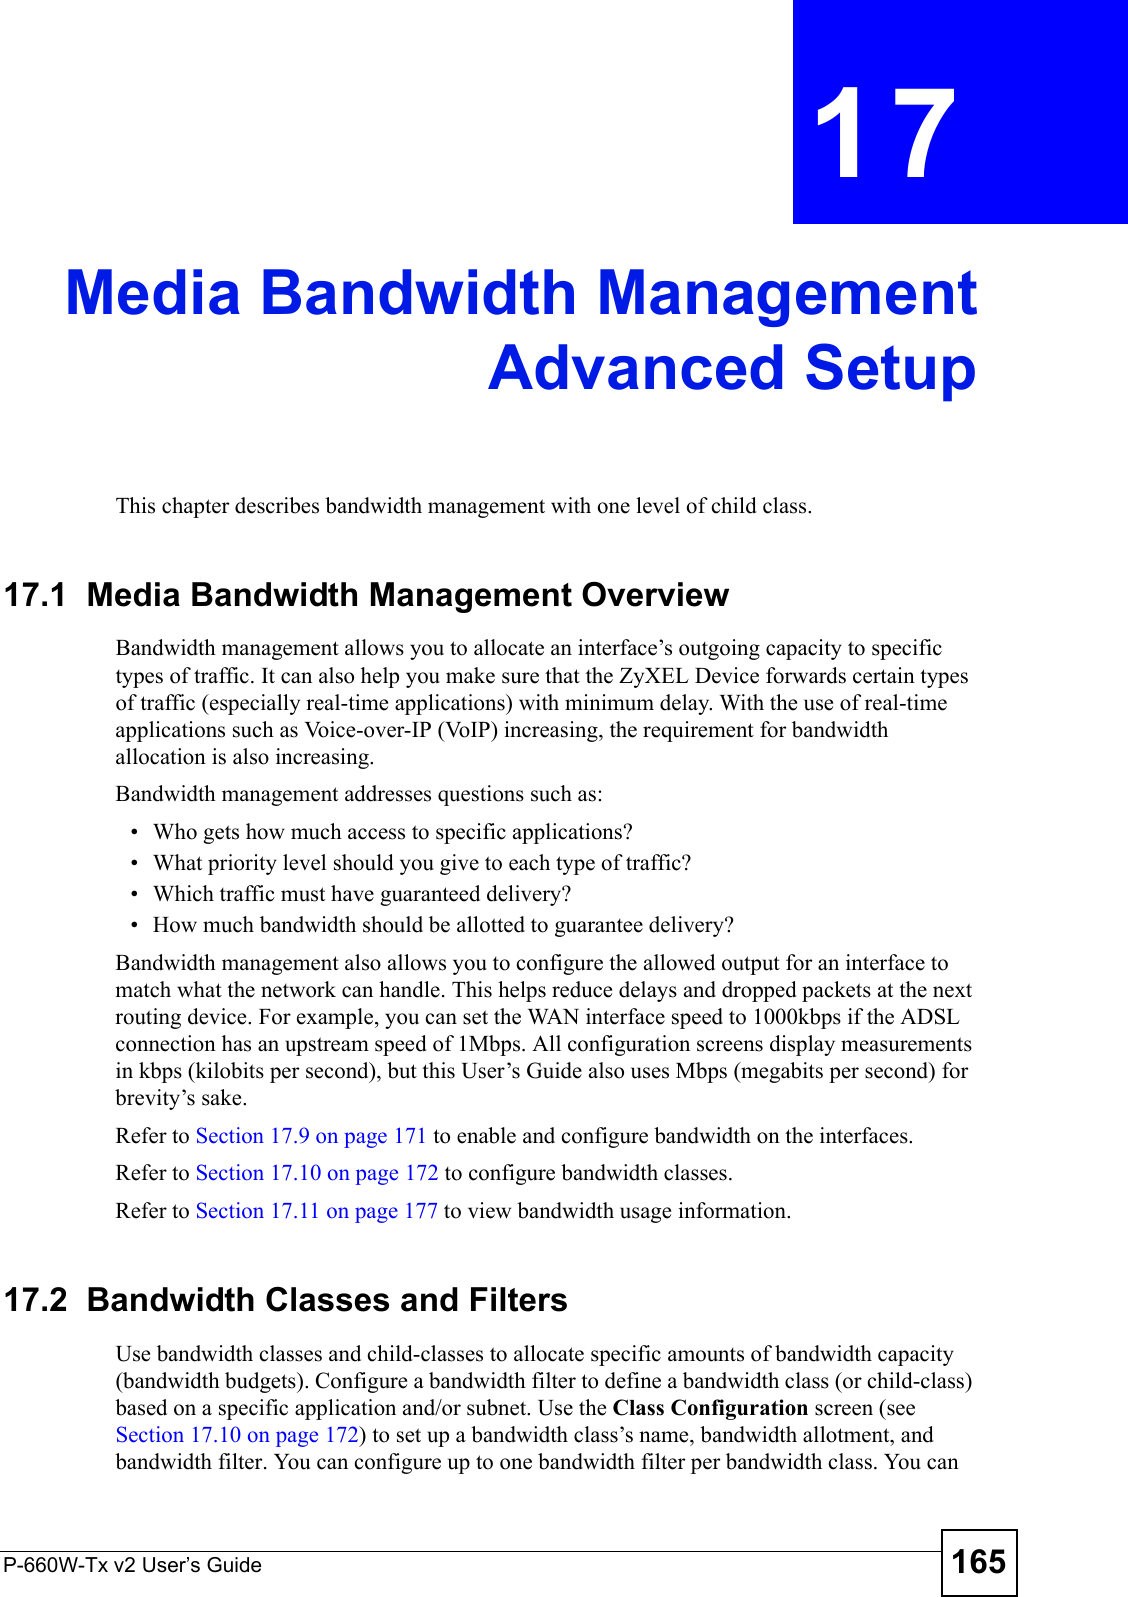 P-660W-Tx v2 User’s Guide 165CHAPTER  17 Media Bandwidth ManagementAdvanced SetupThis chapter describes bandwidth management with one level of child class.17.1  Media Bandwidth Management Overview Bandwidth management allows you to allocate an interface’s outgoing capacity to specific types of traffic. It can also help you make sure that the ZyXEL Device forwards certain types of traffic (especially real-time applications) with minimum delay. With the use of real-time applications such as Voice-over-IP (VoIP) increasing, the requirement for bandwidth allocation is also increasing. Bandwidth management addresses questions such as:• Who gets how much access to specific applications?• What priority level should you give to each type of traffic?• Which traffic must have guaranteed delivery?• How much bandwidth should be allotted to guarantee delivery?Bandwidth management also allows you to configure the allowed output for an interface to match what the network can handle. This helps reduce delays and dropped packets at the next routing device. For example, you can set the WAN interface speed to 1000kbps if the ADSL connection has an upstream speed of 1Mbps. All configuration screens display measurements in kbps (kilobits per second), but this User’s Guide also uses Mbps (megabits per second) for brevity’s sake.Refer to Section 17.9 on page 171 to enable and configure bandwidth on the interfaces. Refer to Section 17.10 on page 172 to configure bandwidth classes. Refer to Section 17.11 on page 177 to view bandwidth usage information. 17.2  Bandwidth Classes and FiltersUse bandwidth classes and child-classes to allocate specific amounts of bandwidth capacity (bandwidth budgets). Configure a bandwidth filter to define a bandwidth class (or child-class) based on a specific application and/or subnet. Use the Class Configuration screen (see Section 17.10 on page 172) to set up a bandwidth class’s name, bandwidth allotment, and bandwidth filter. You can configure up to one bandwidth filter per bandwidth class. You can 